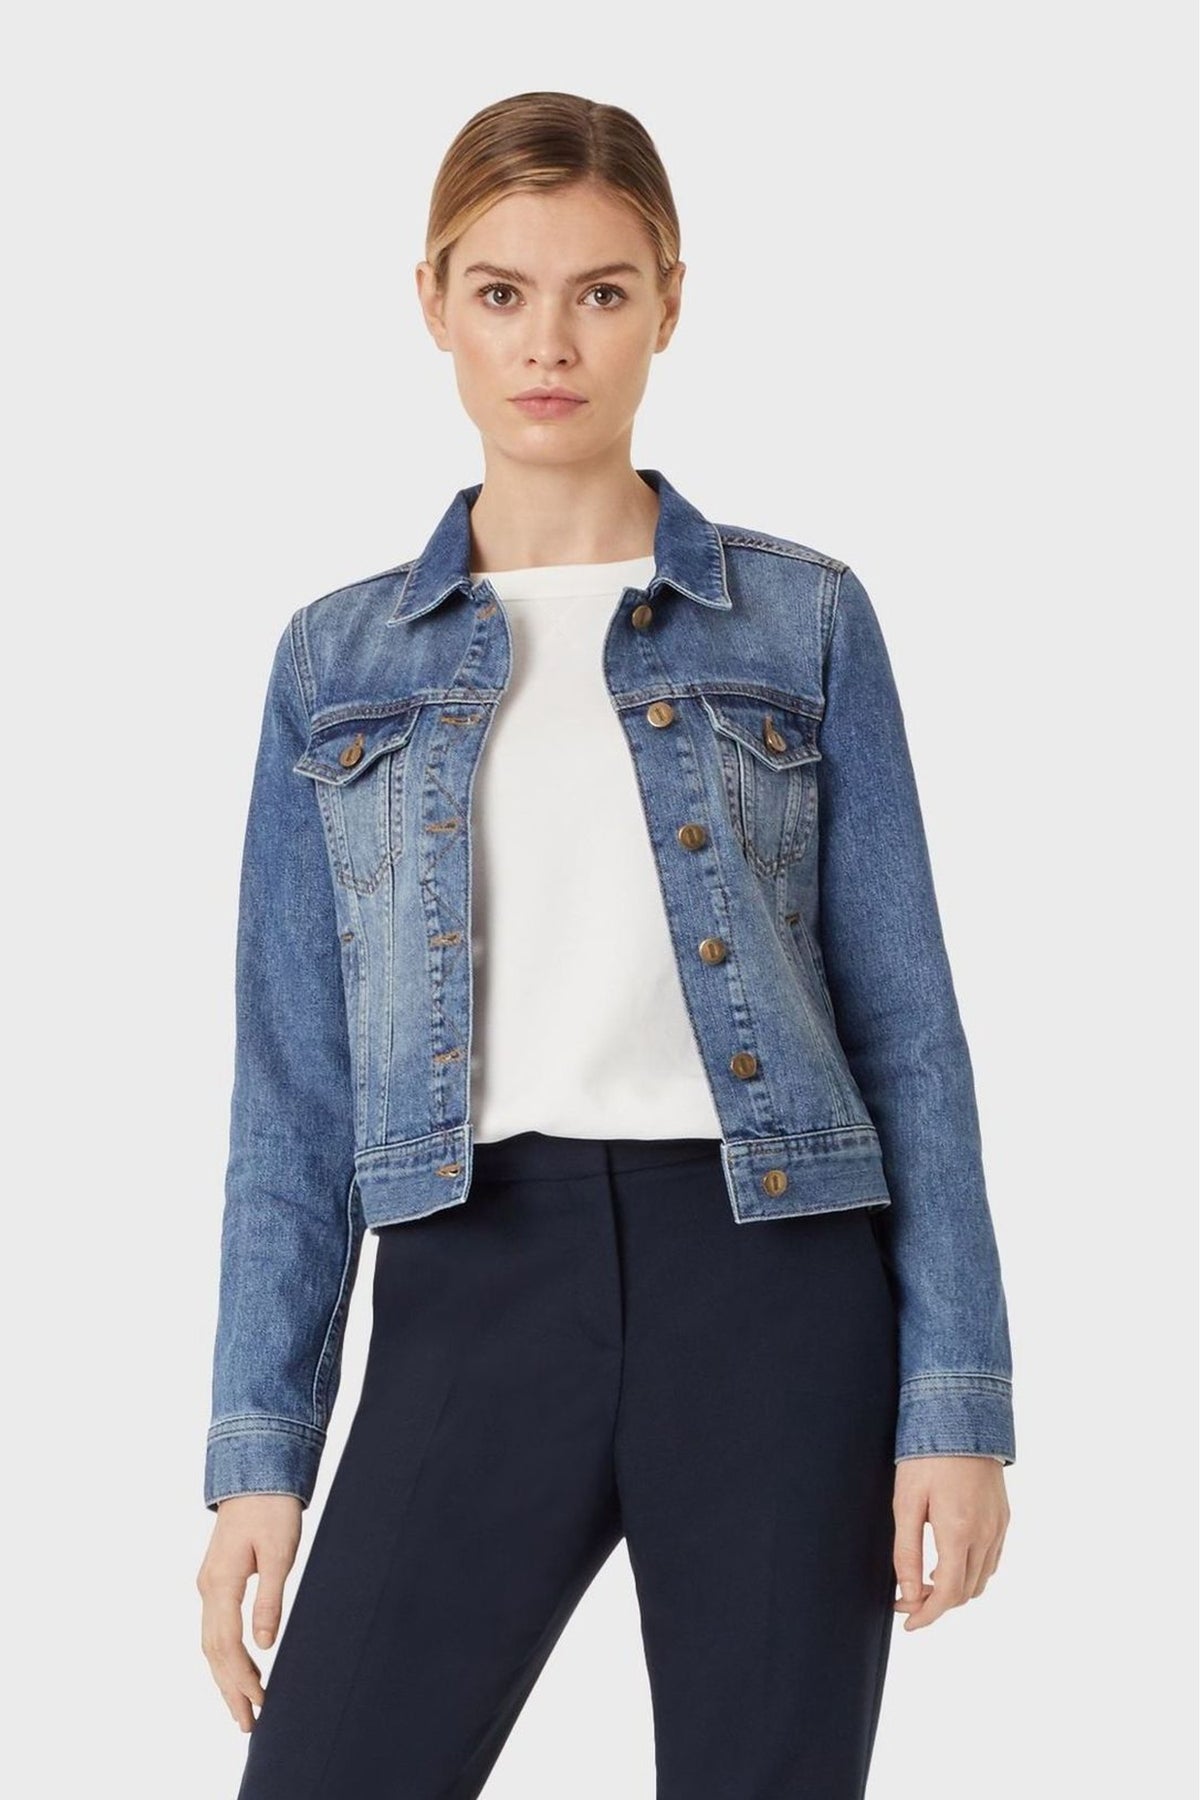 Denim jacket with collared neckline, blue wash, and brass button detailing on Hobbs product model